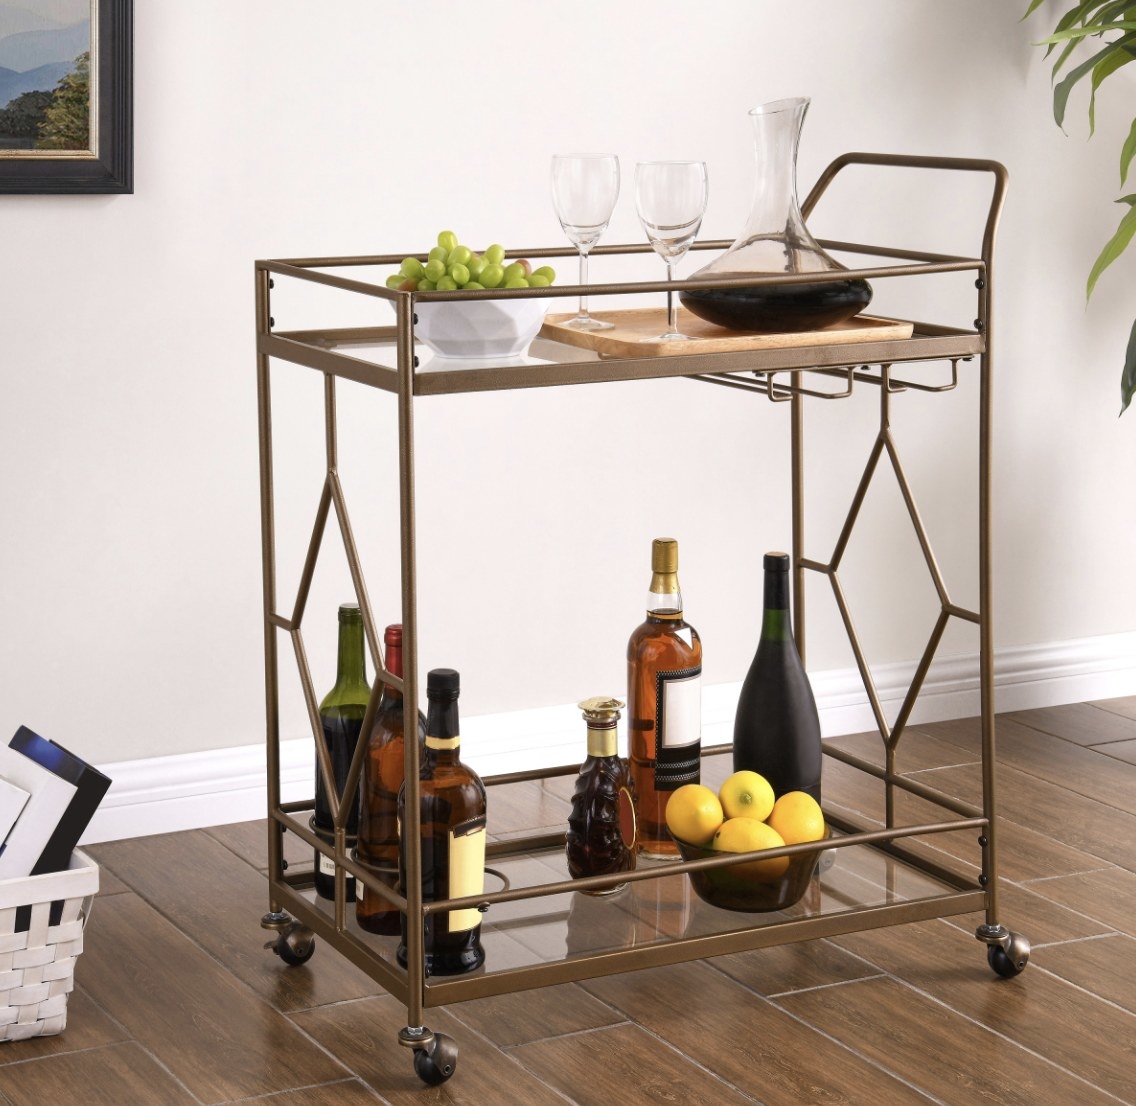 The brass bar cart with geometric shapes is holding bottles, fruit and glasses